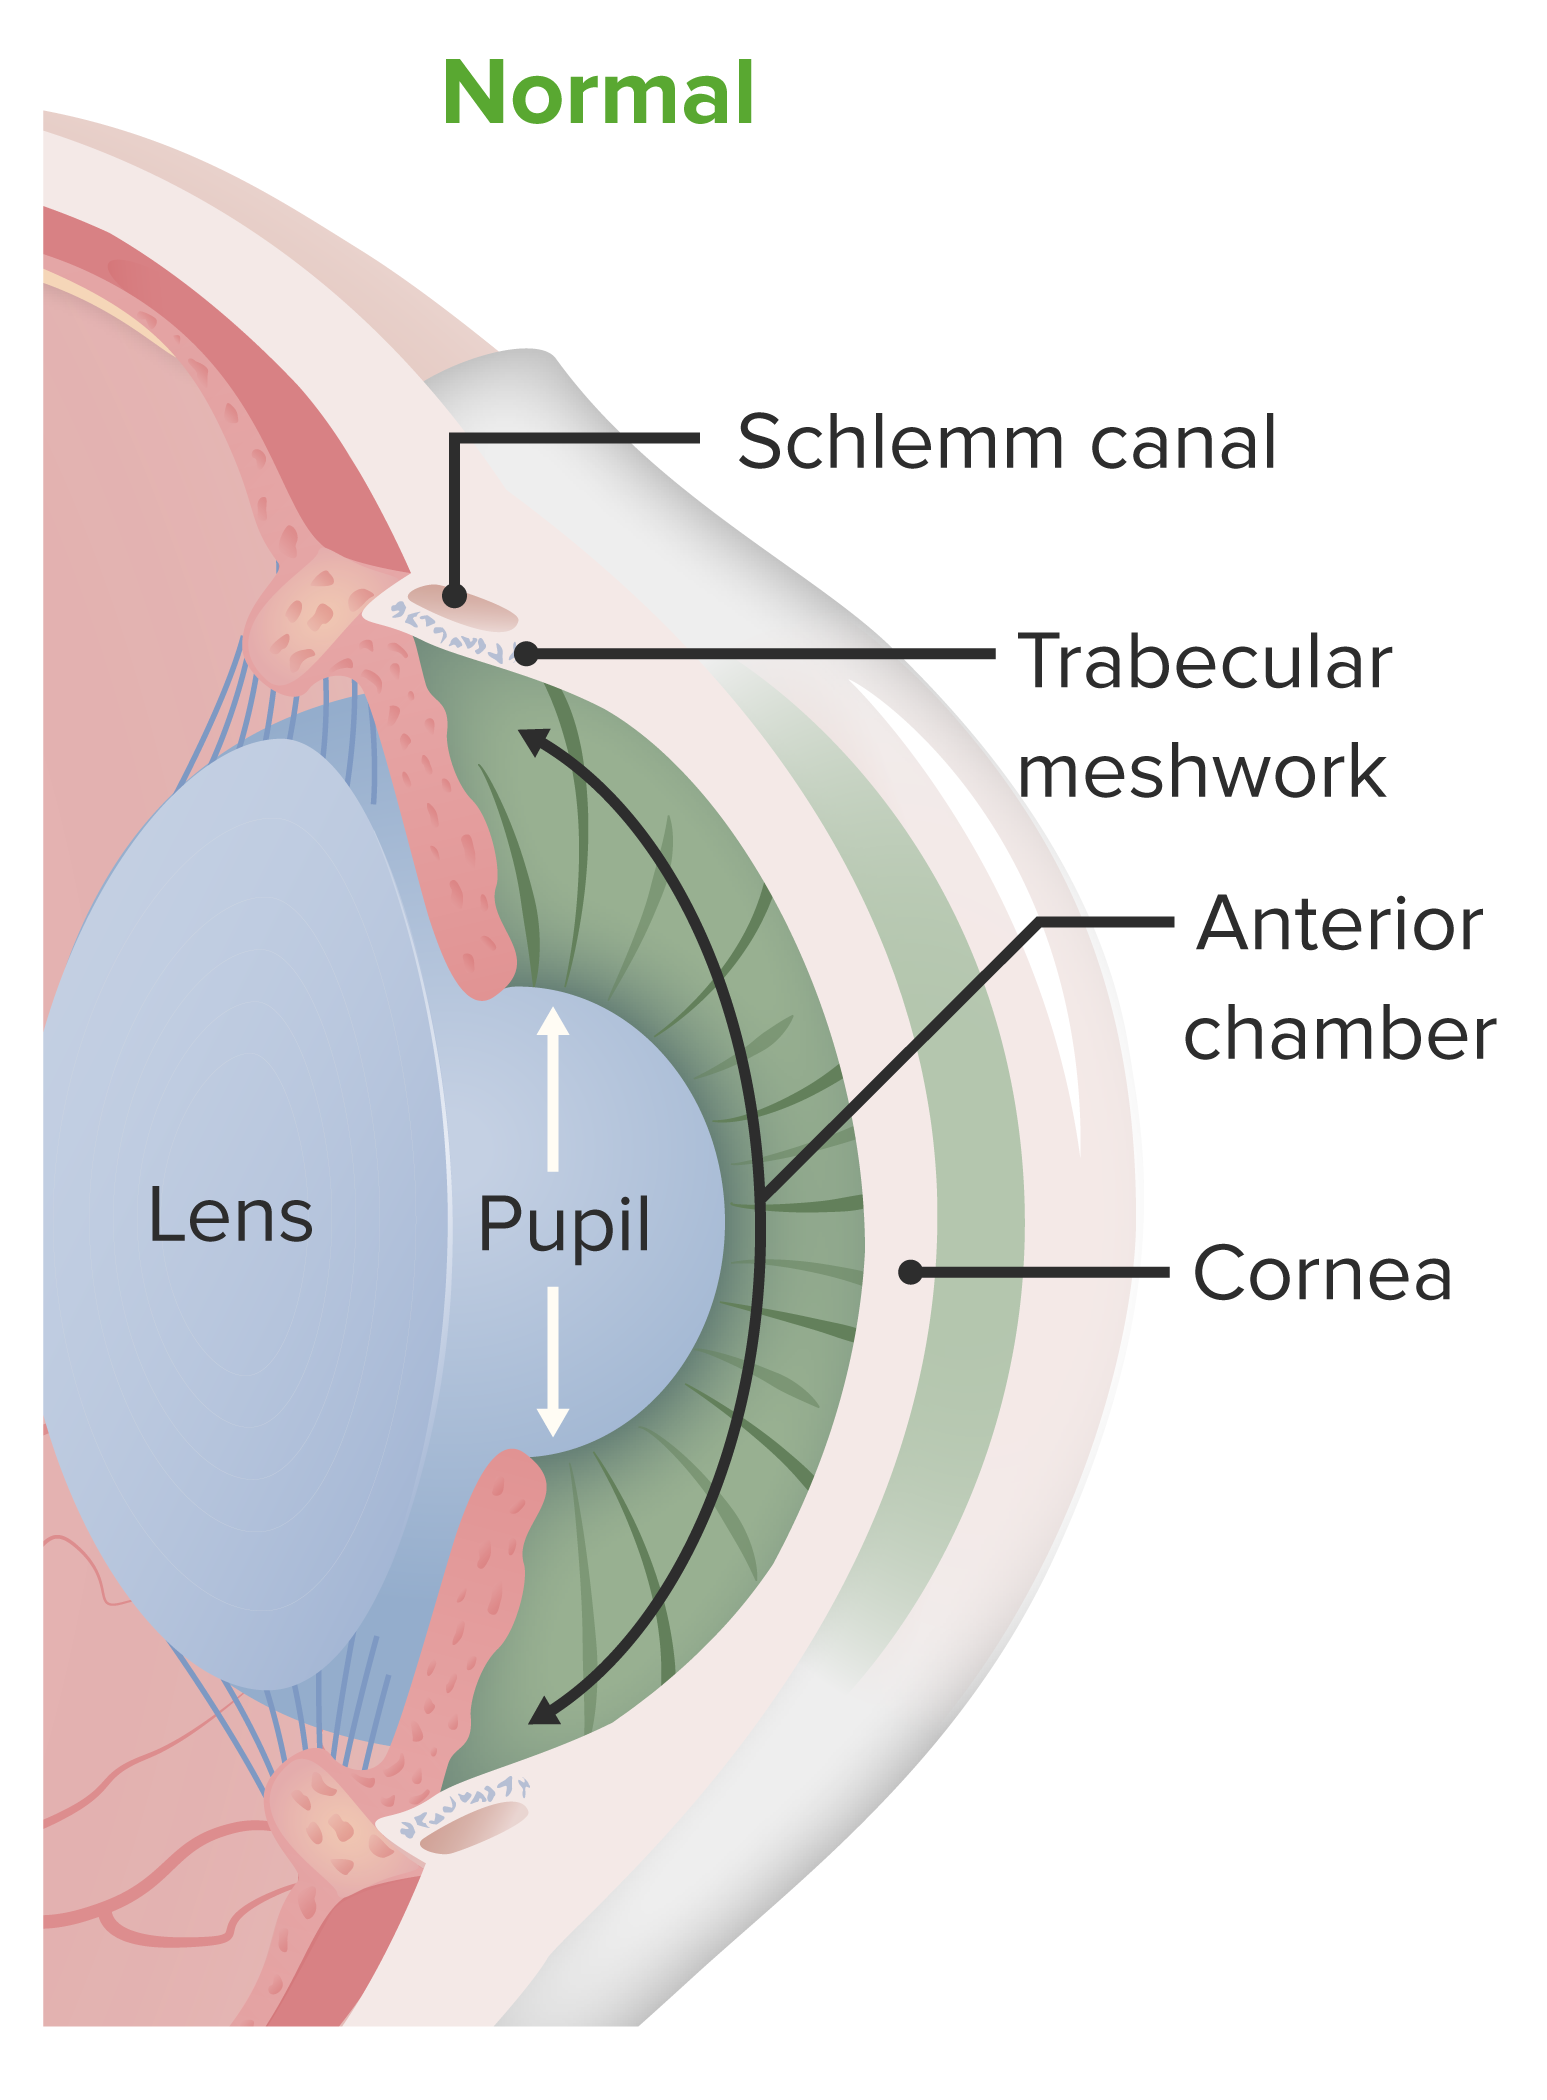 Diagram of the anatomy of the anterior chamber of the eye